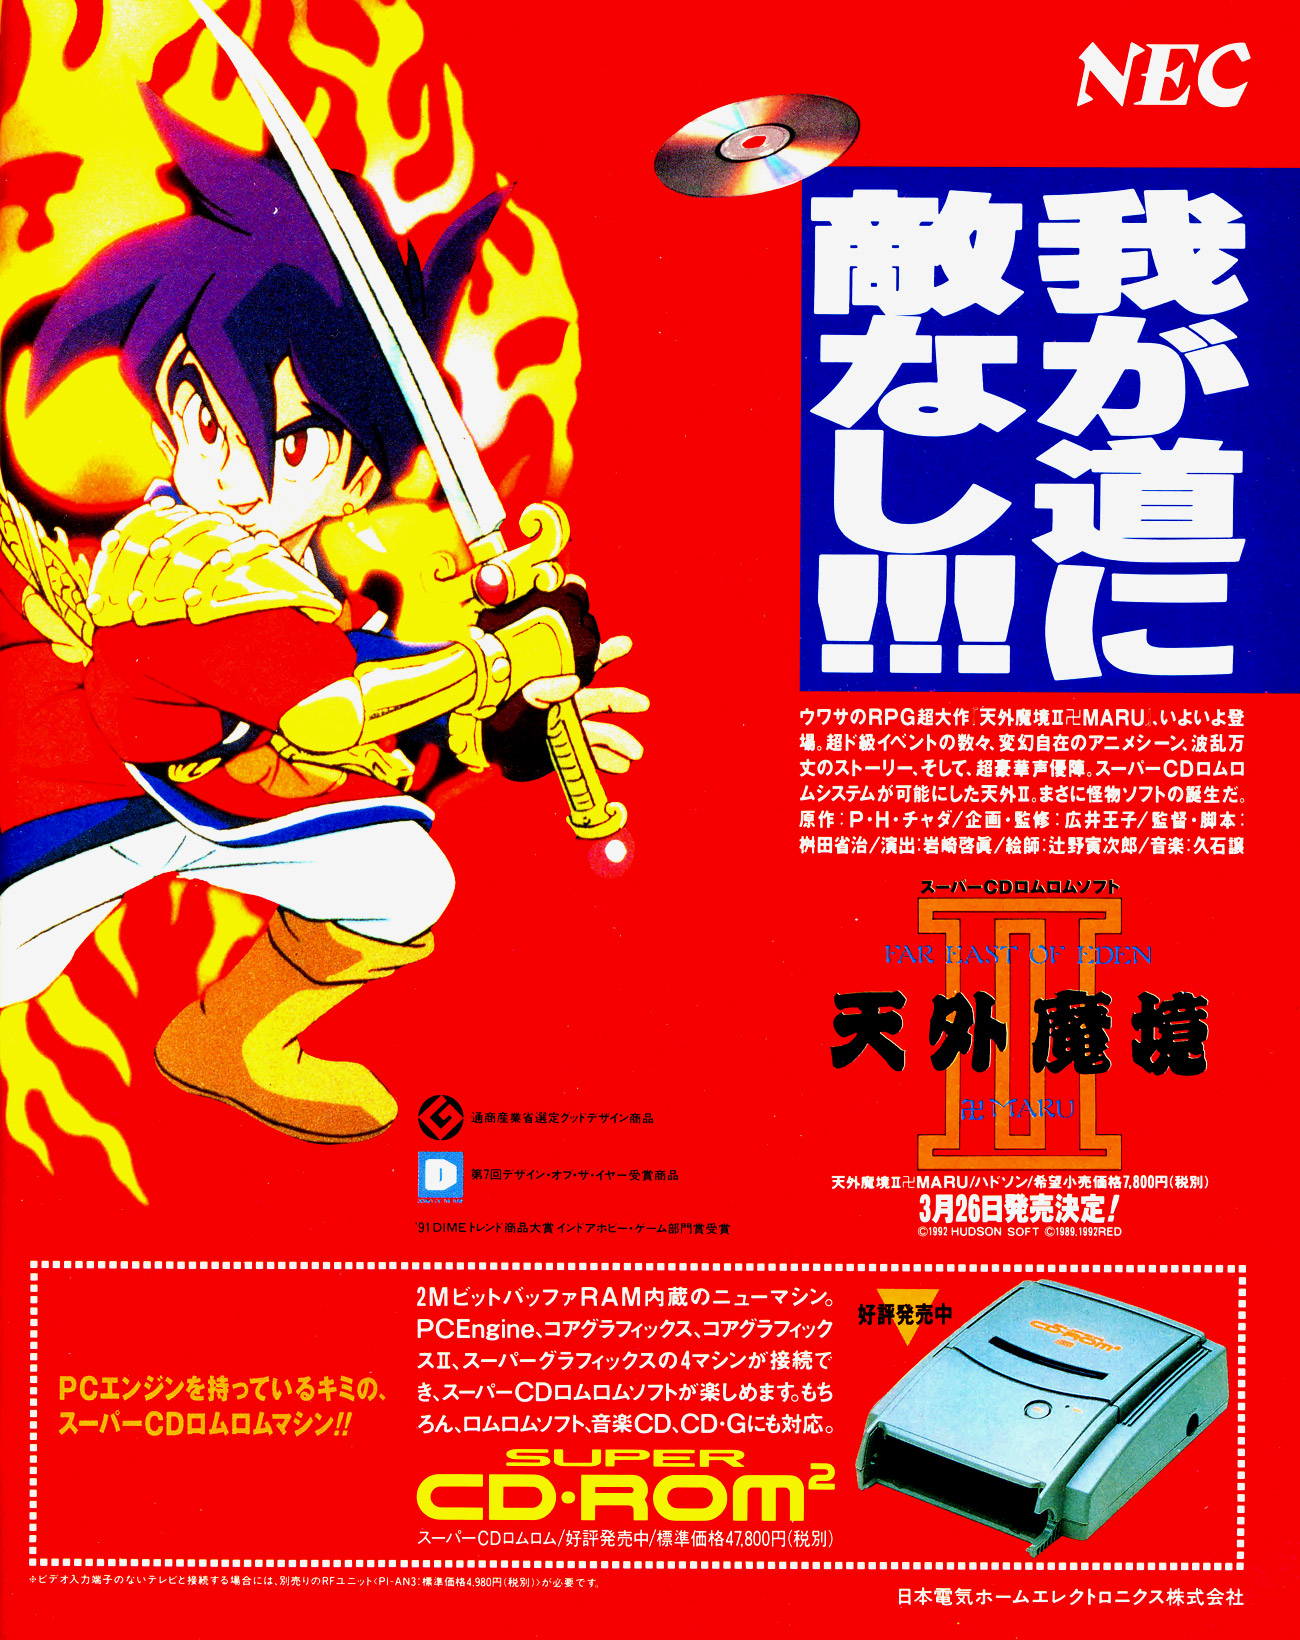 Gekkan Pc Engine 03 March 1992 Turboplay Magazine Archives